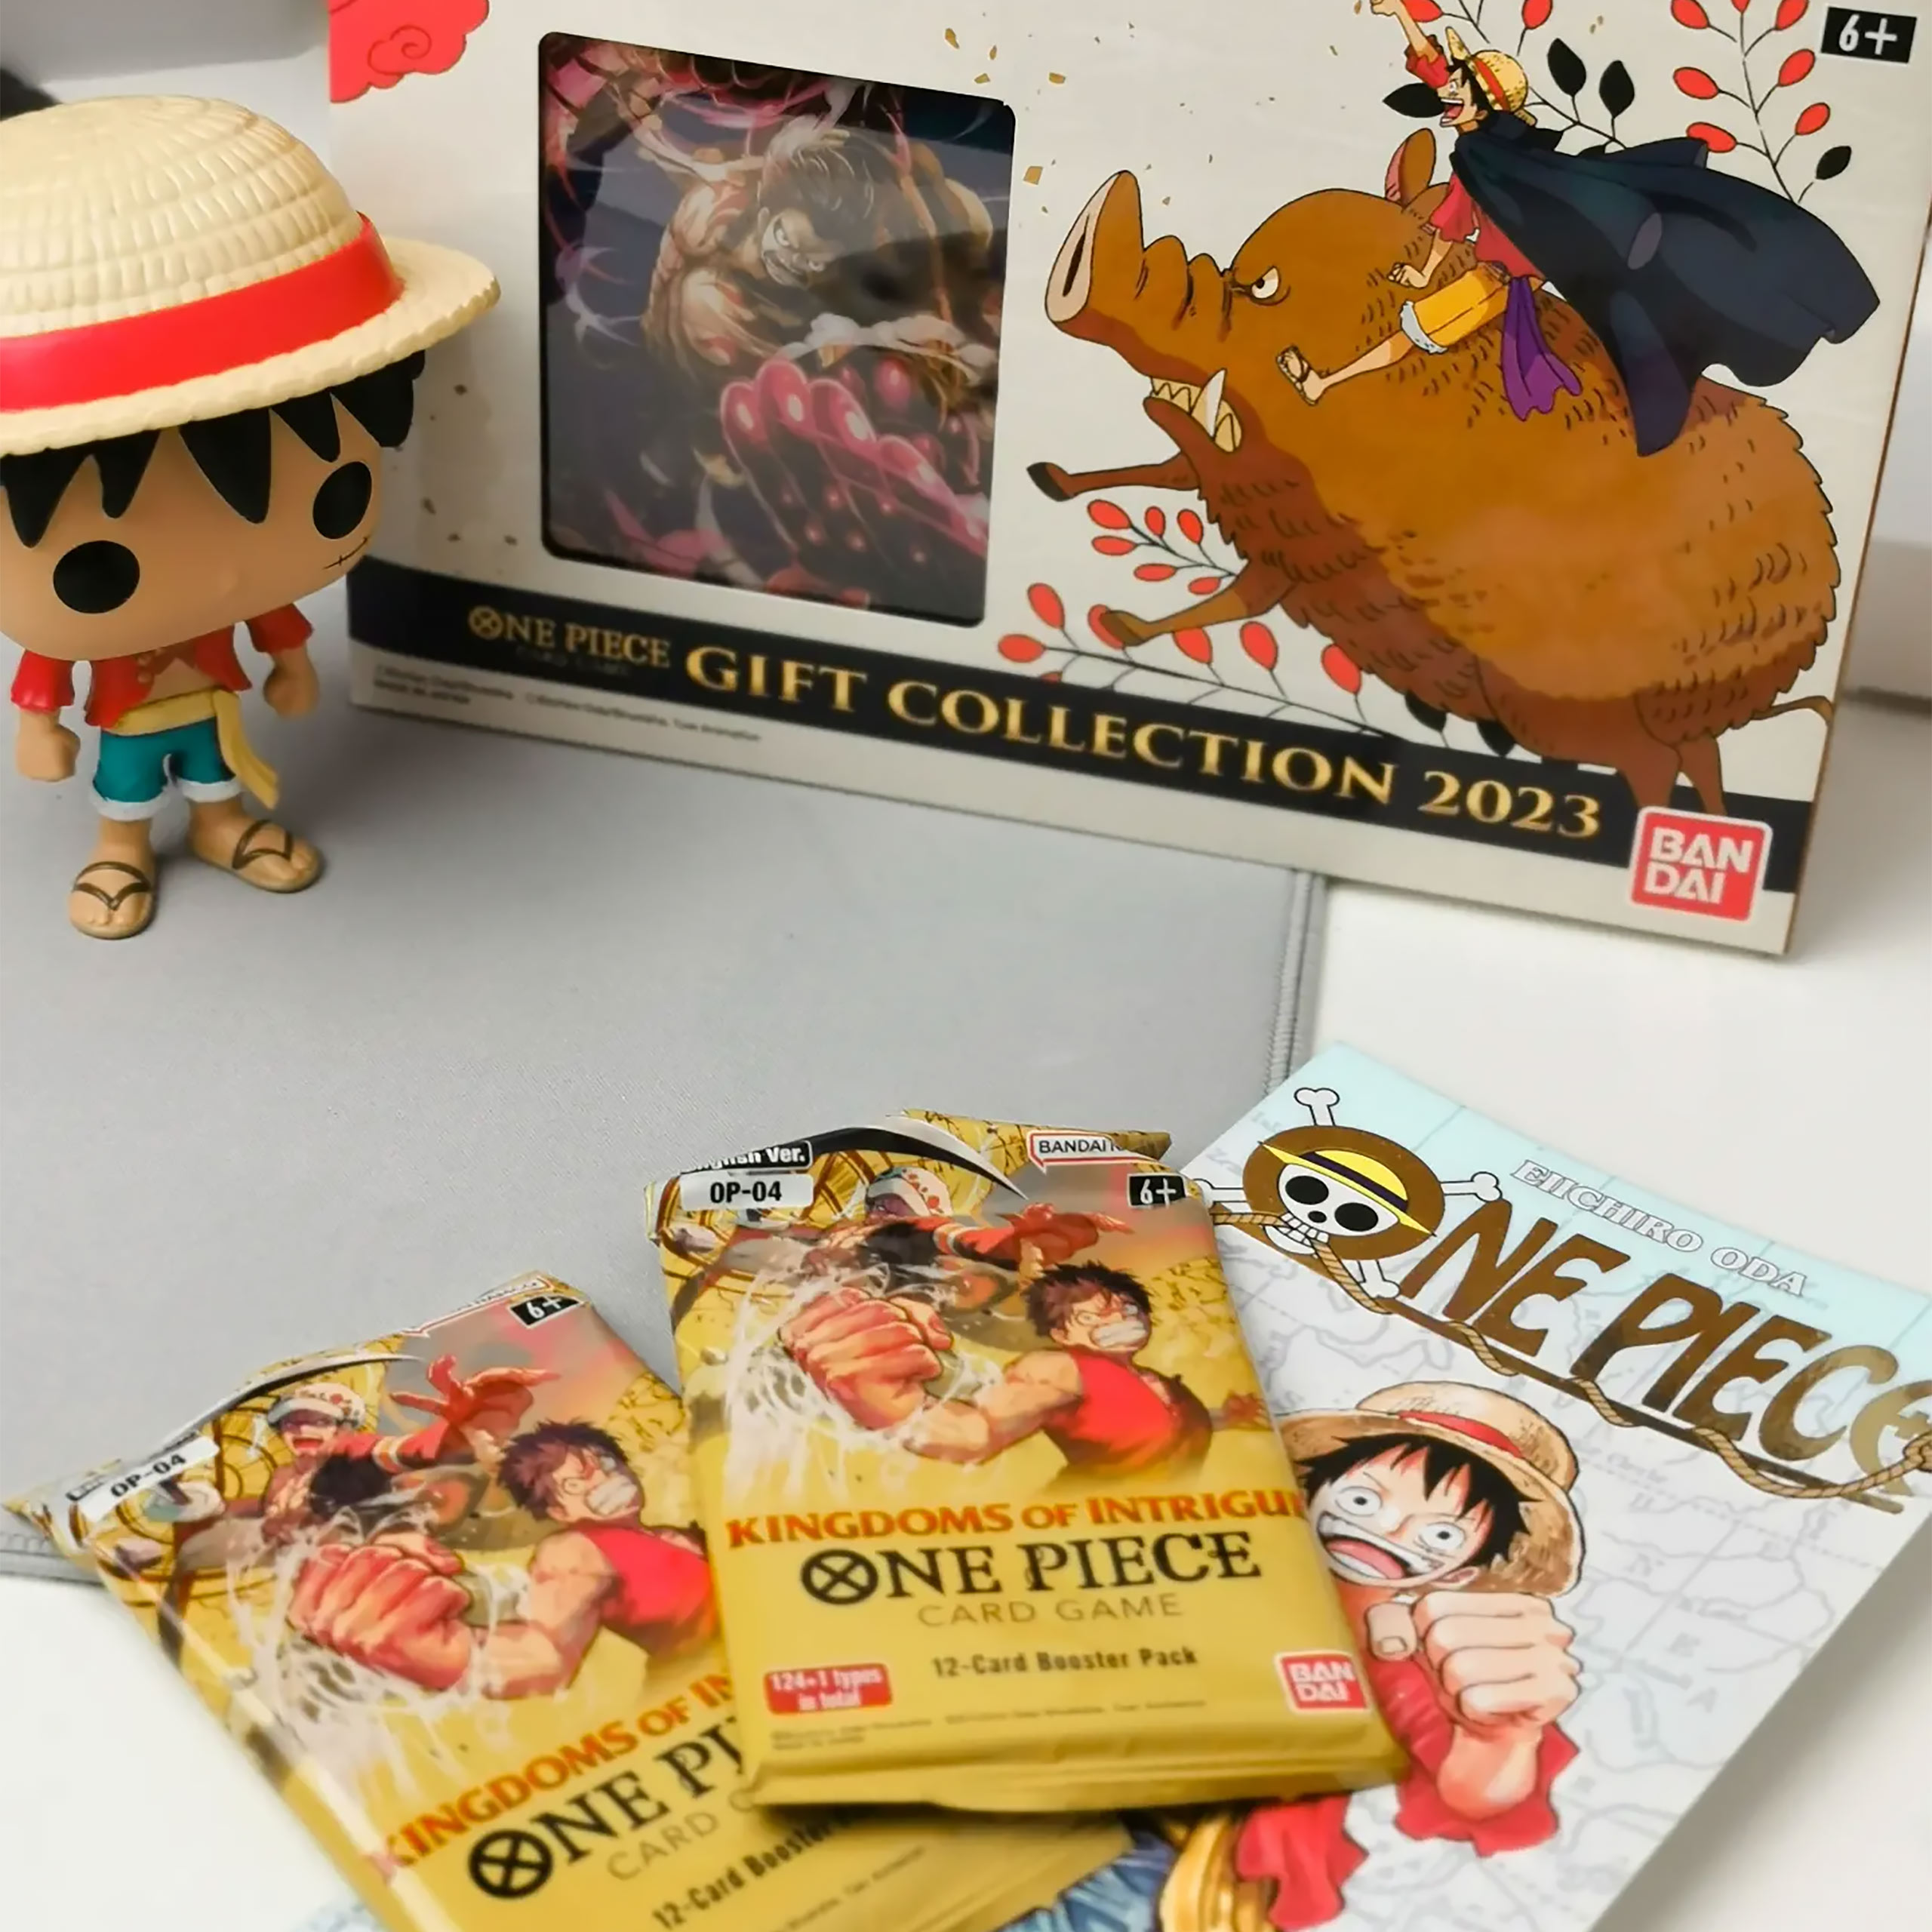 Calendrier des sorties One Piece card game 2023 - Le Coin Des Barons